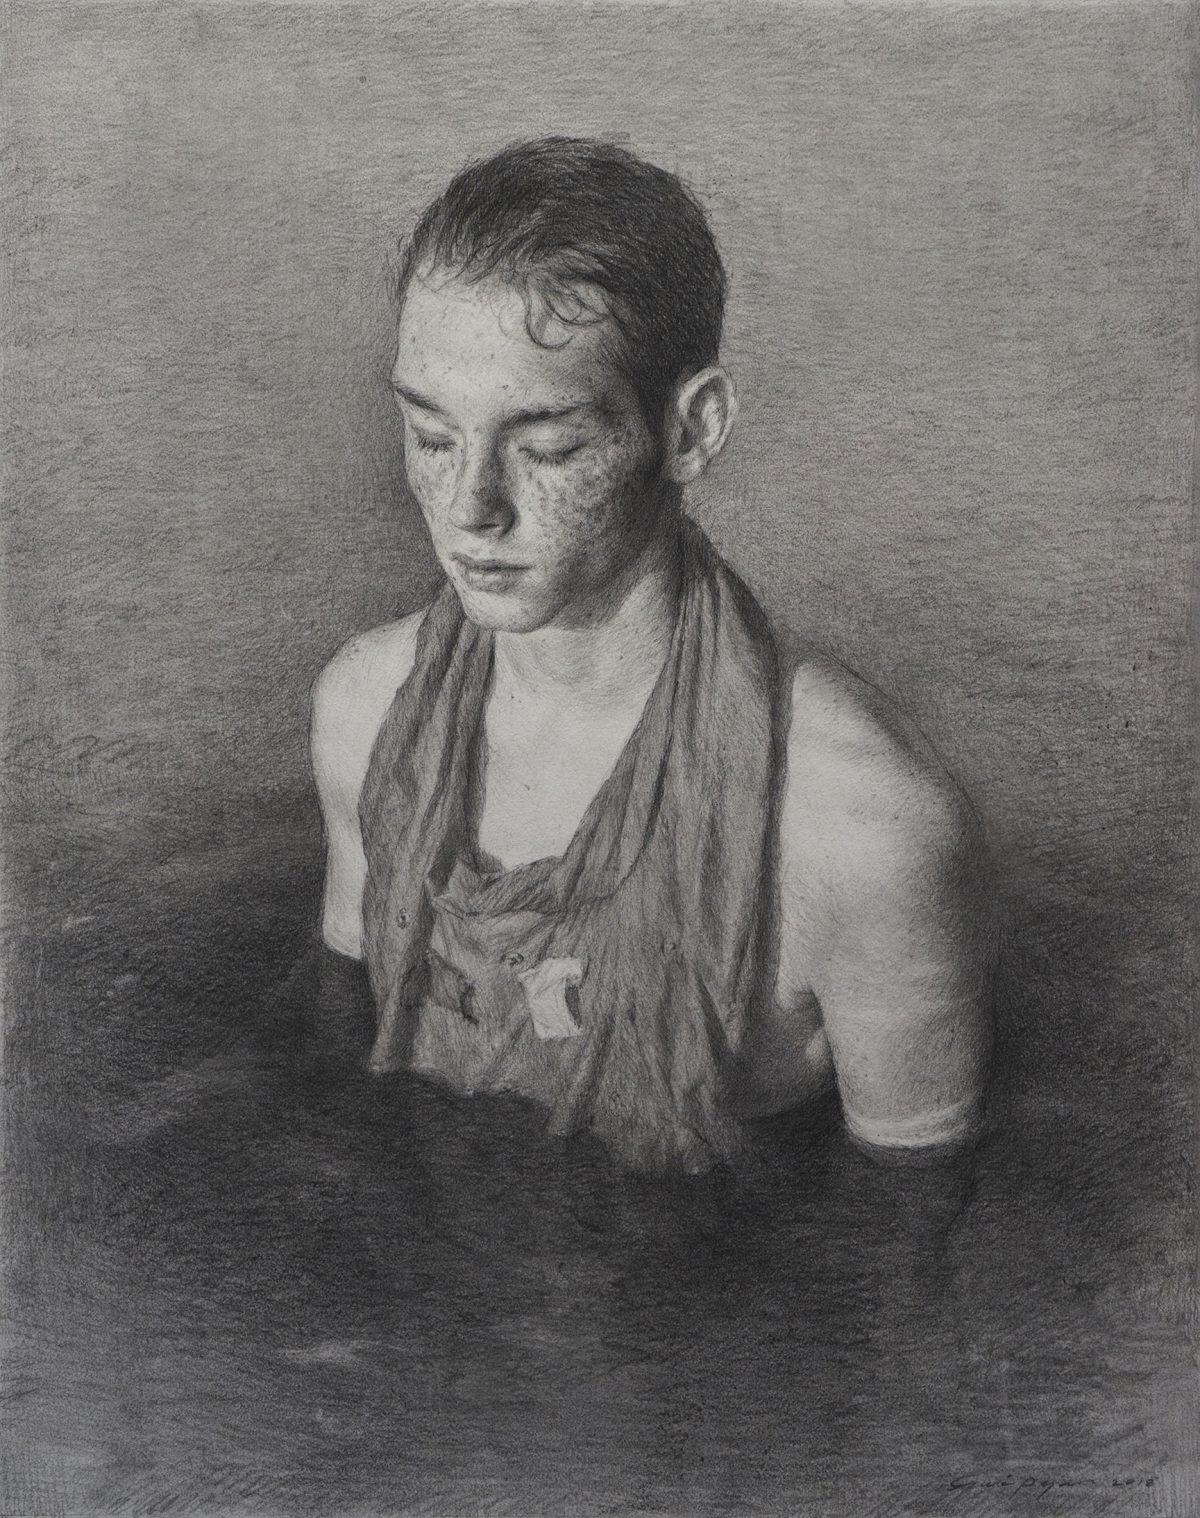  "La Mer" by Julio Reyes. Graphite on paper, 18.25 inches by 14.5 inches. (The Florence Academy of Art–U.S.)